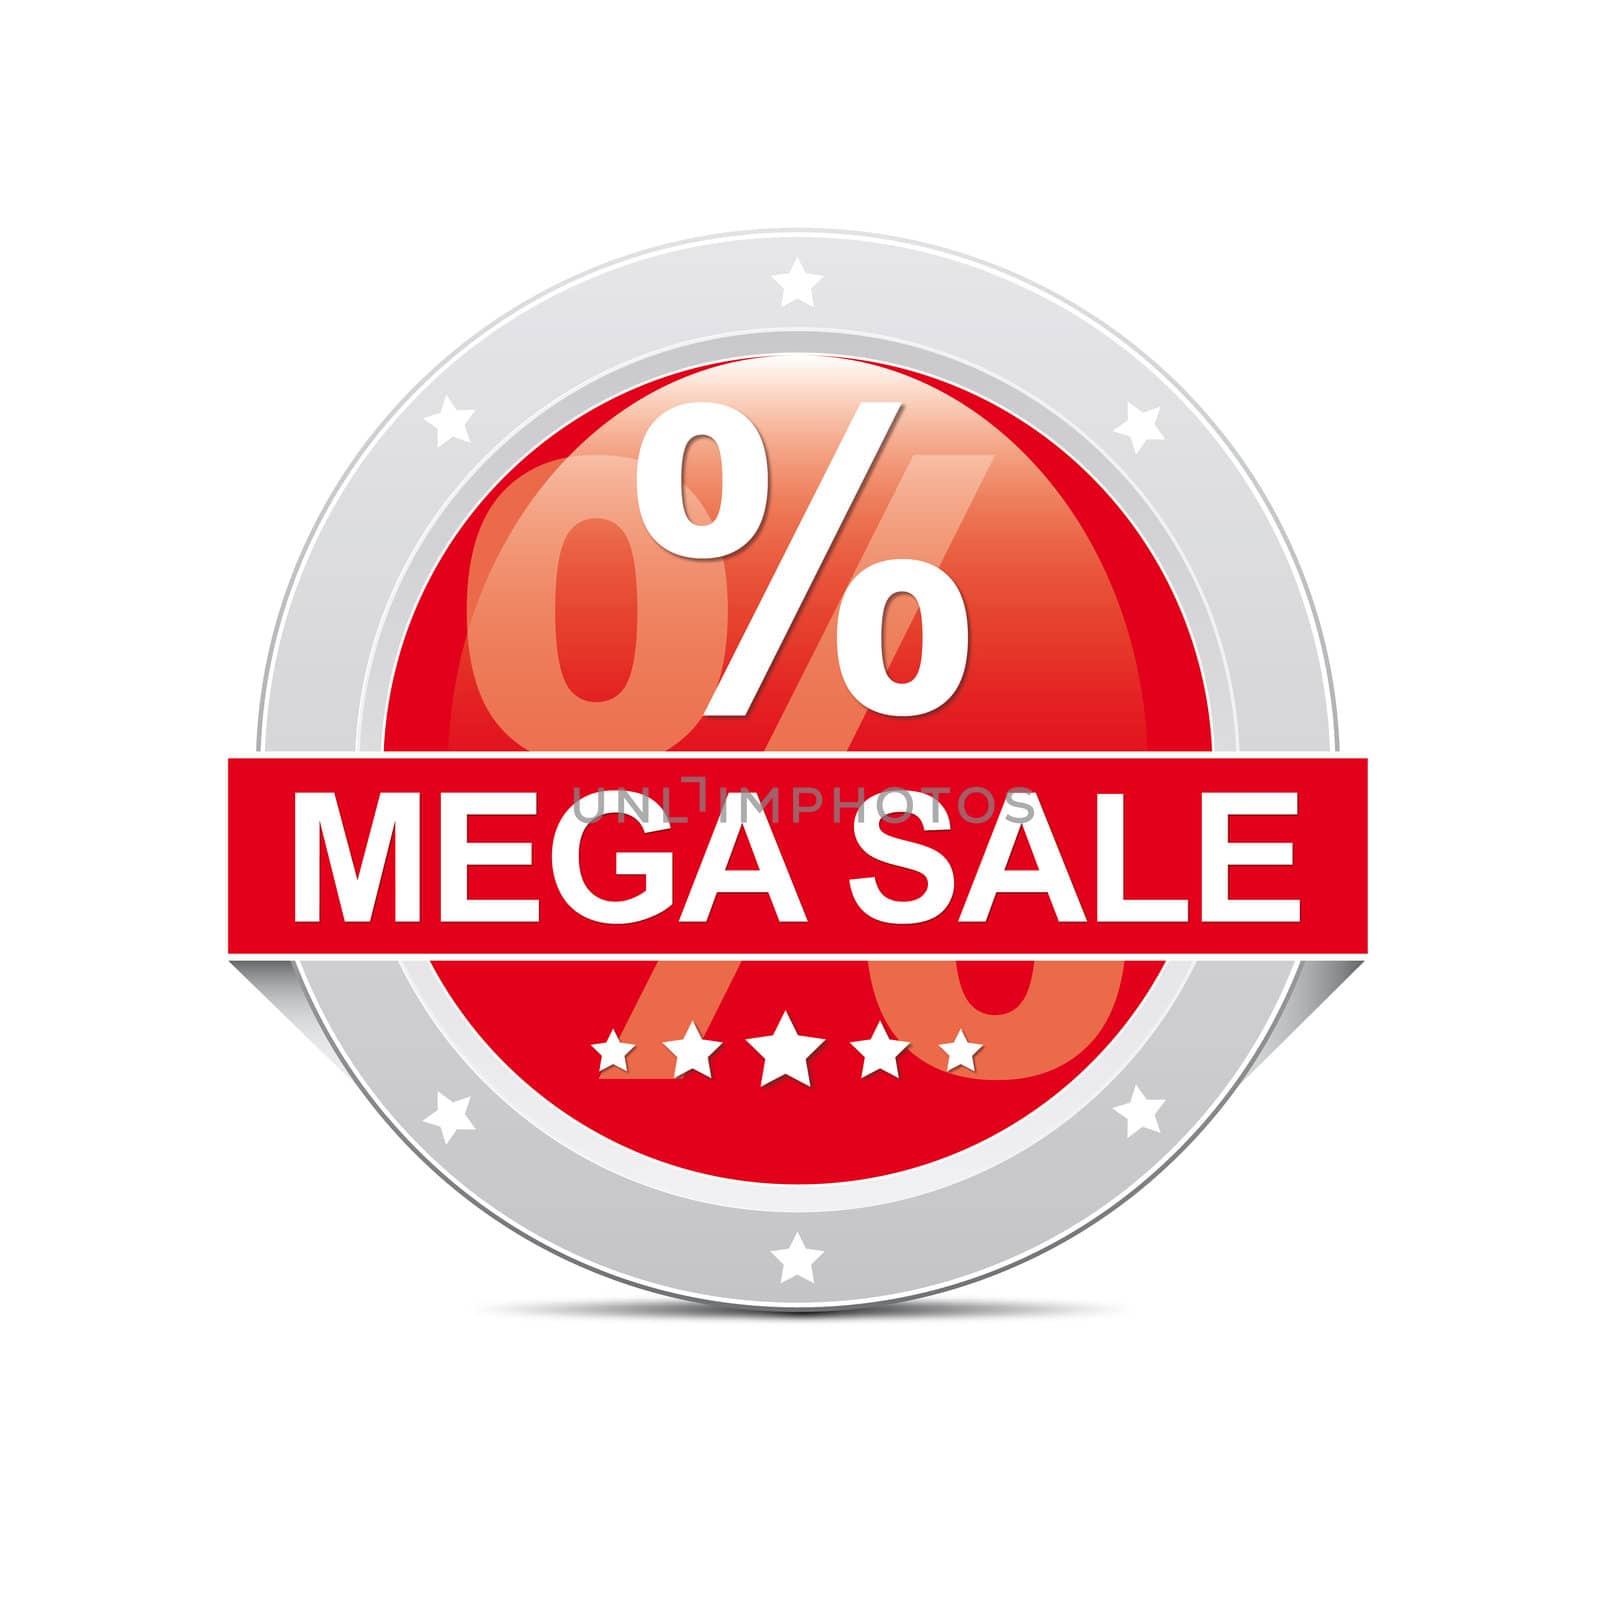 Red Mega Sale Button Icon with Percent